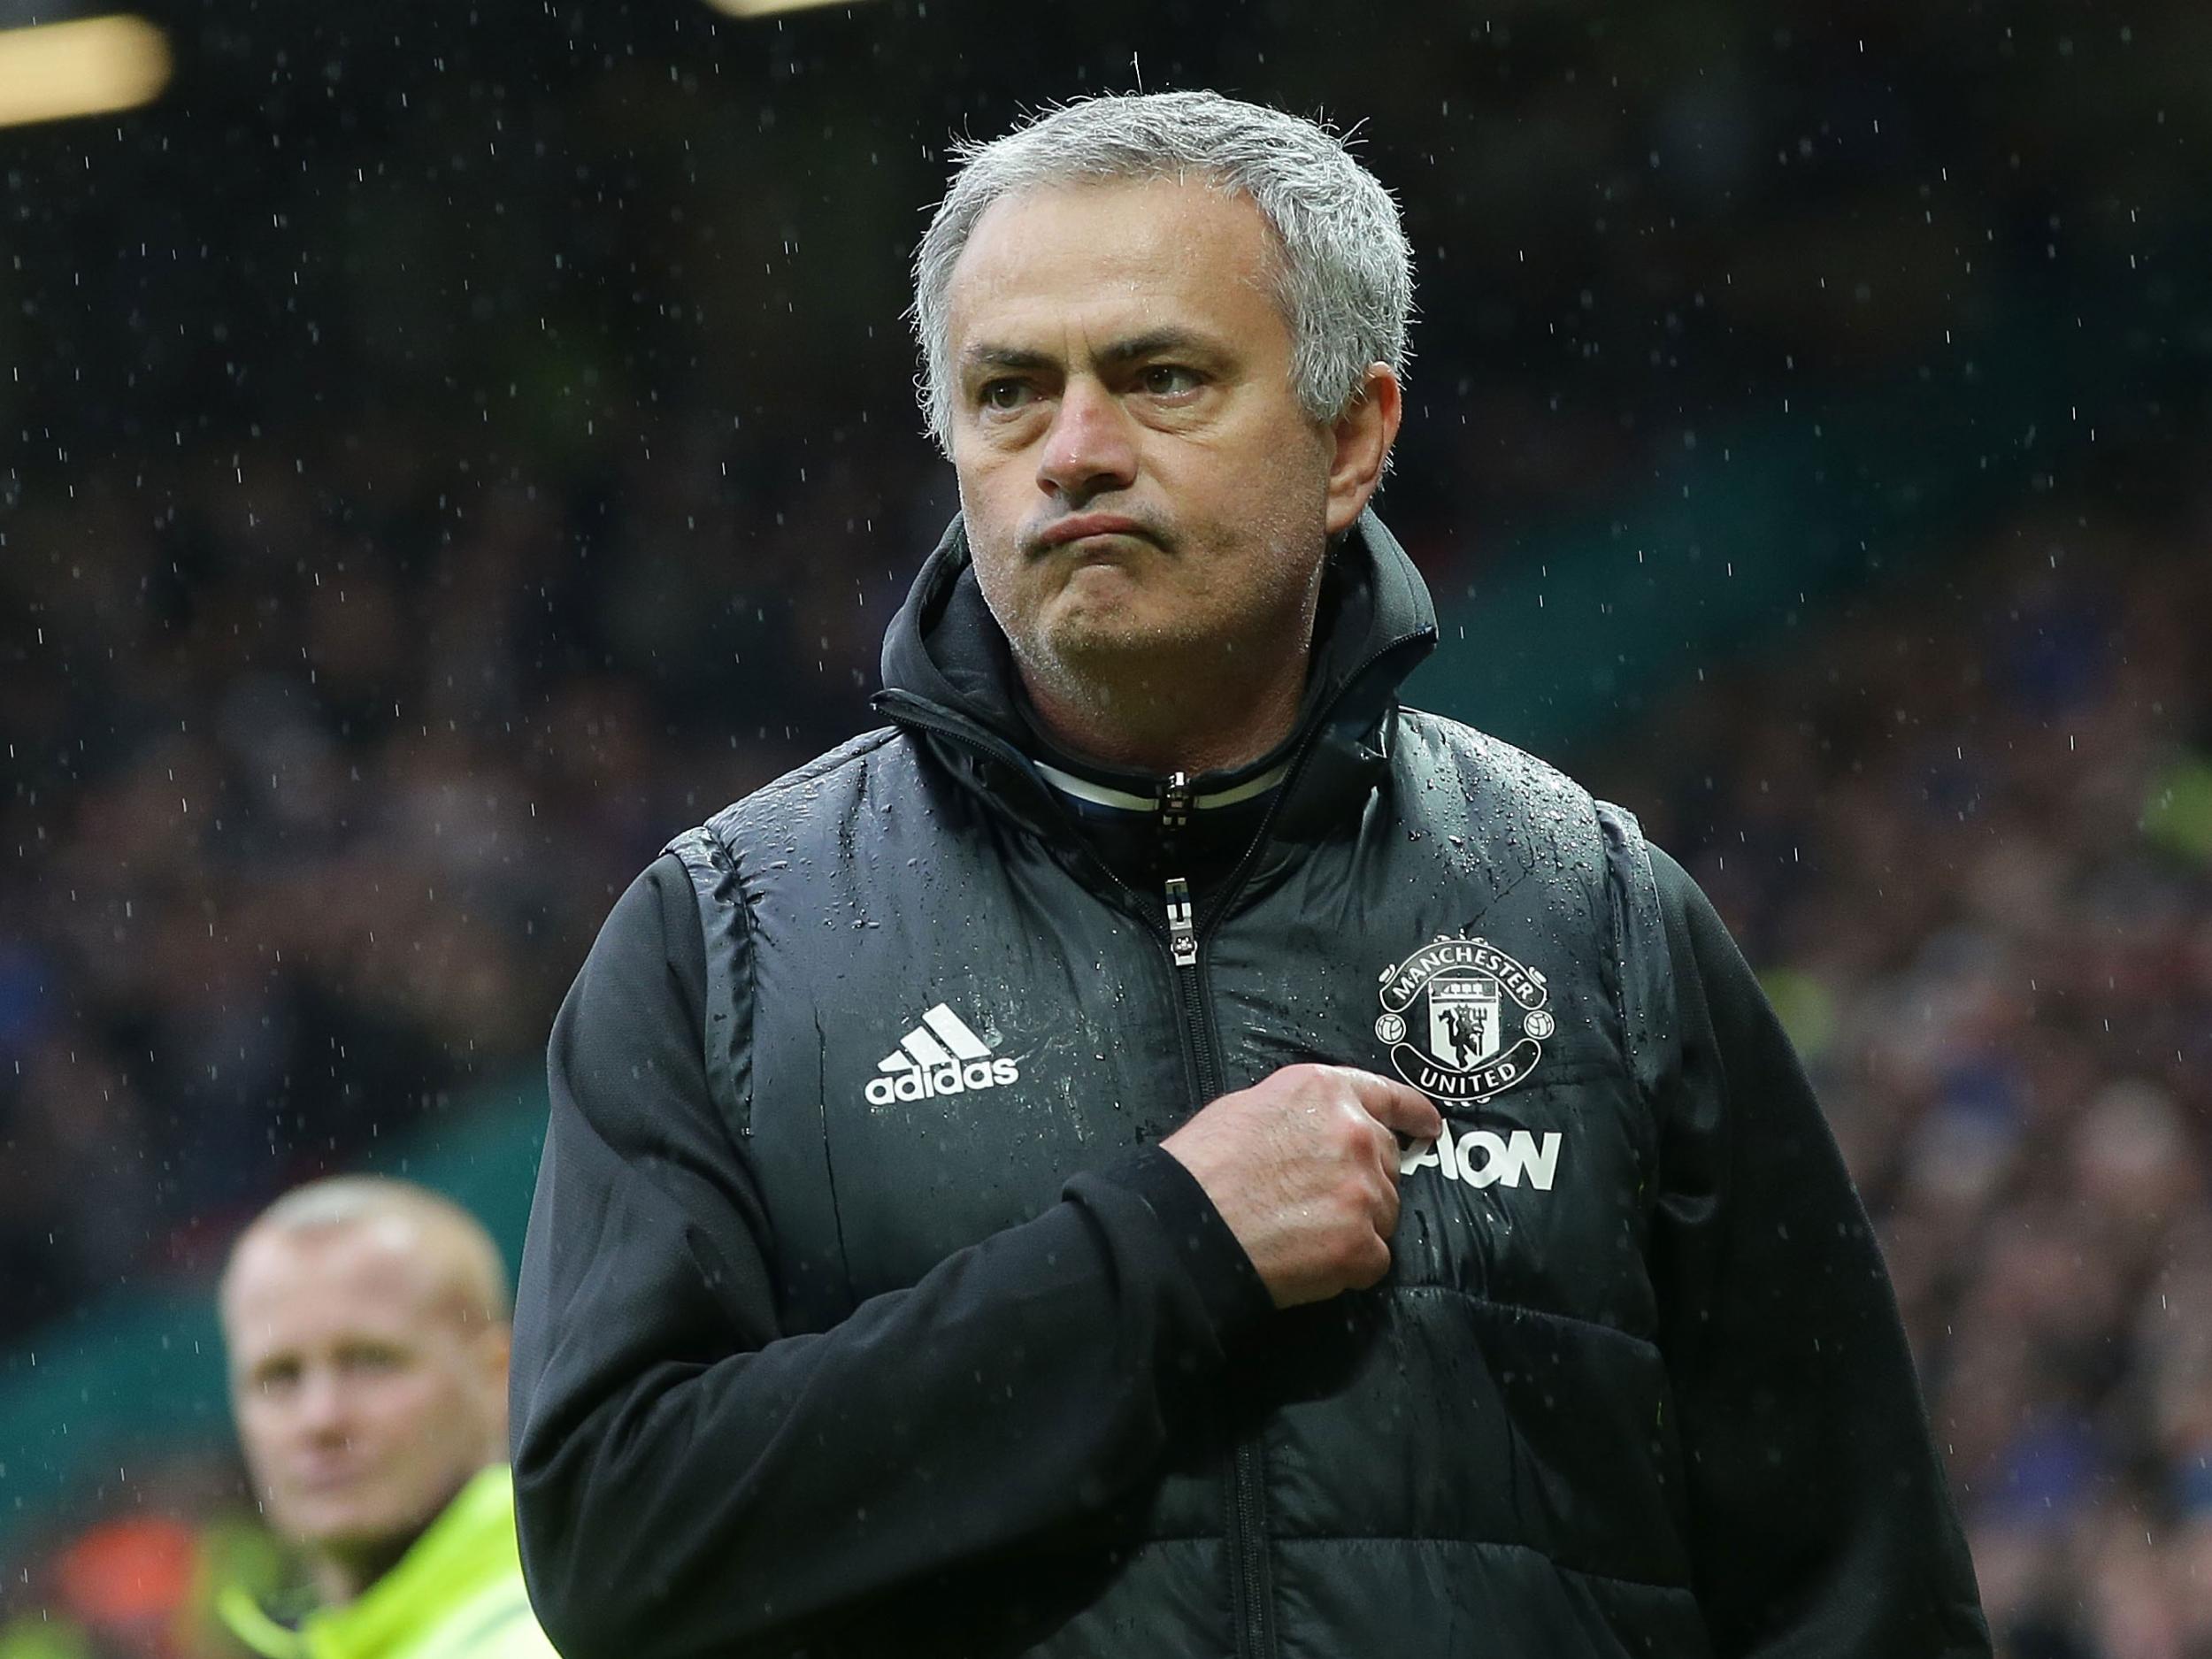 Jose Mourinho was delighted with United's win over Chelsea